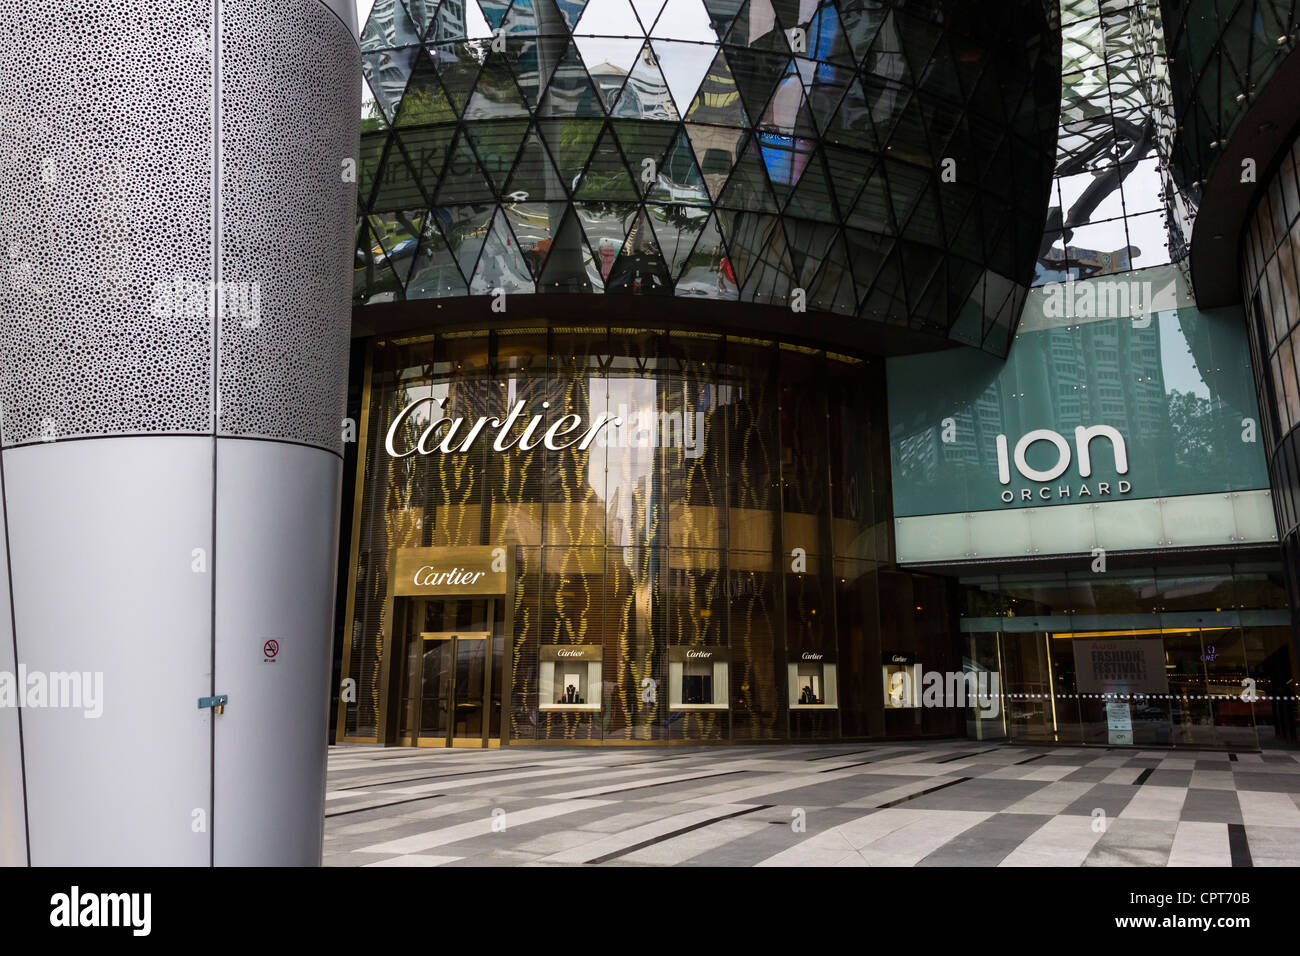 cartier singapore orchard